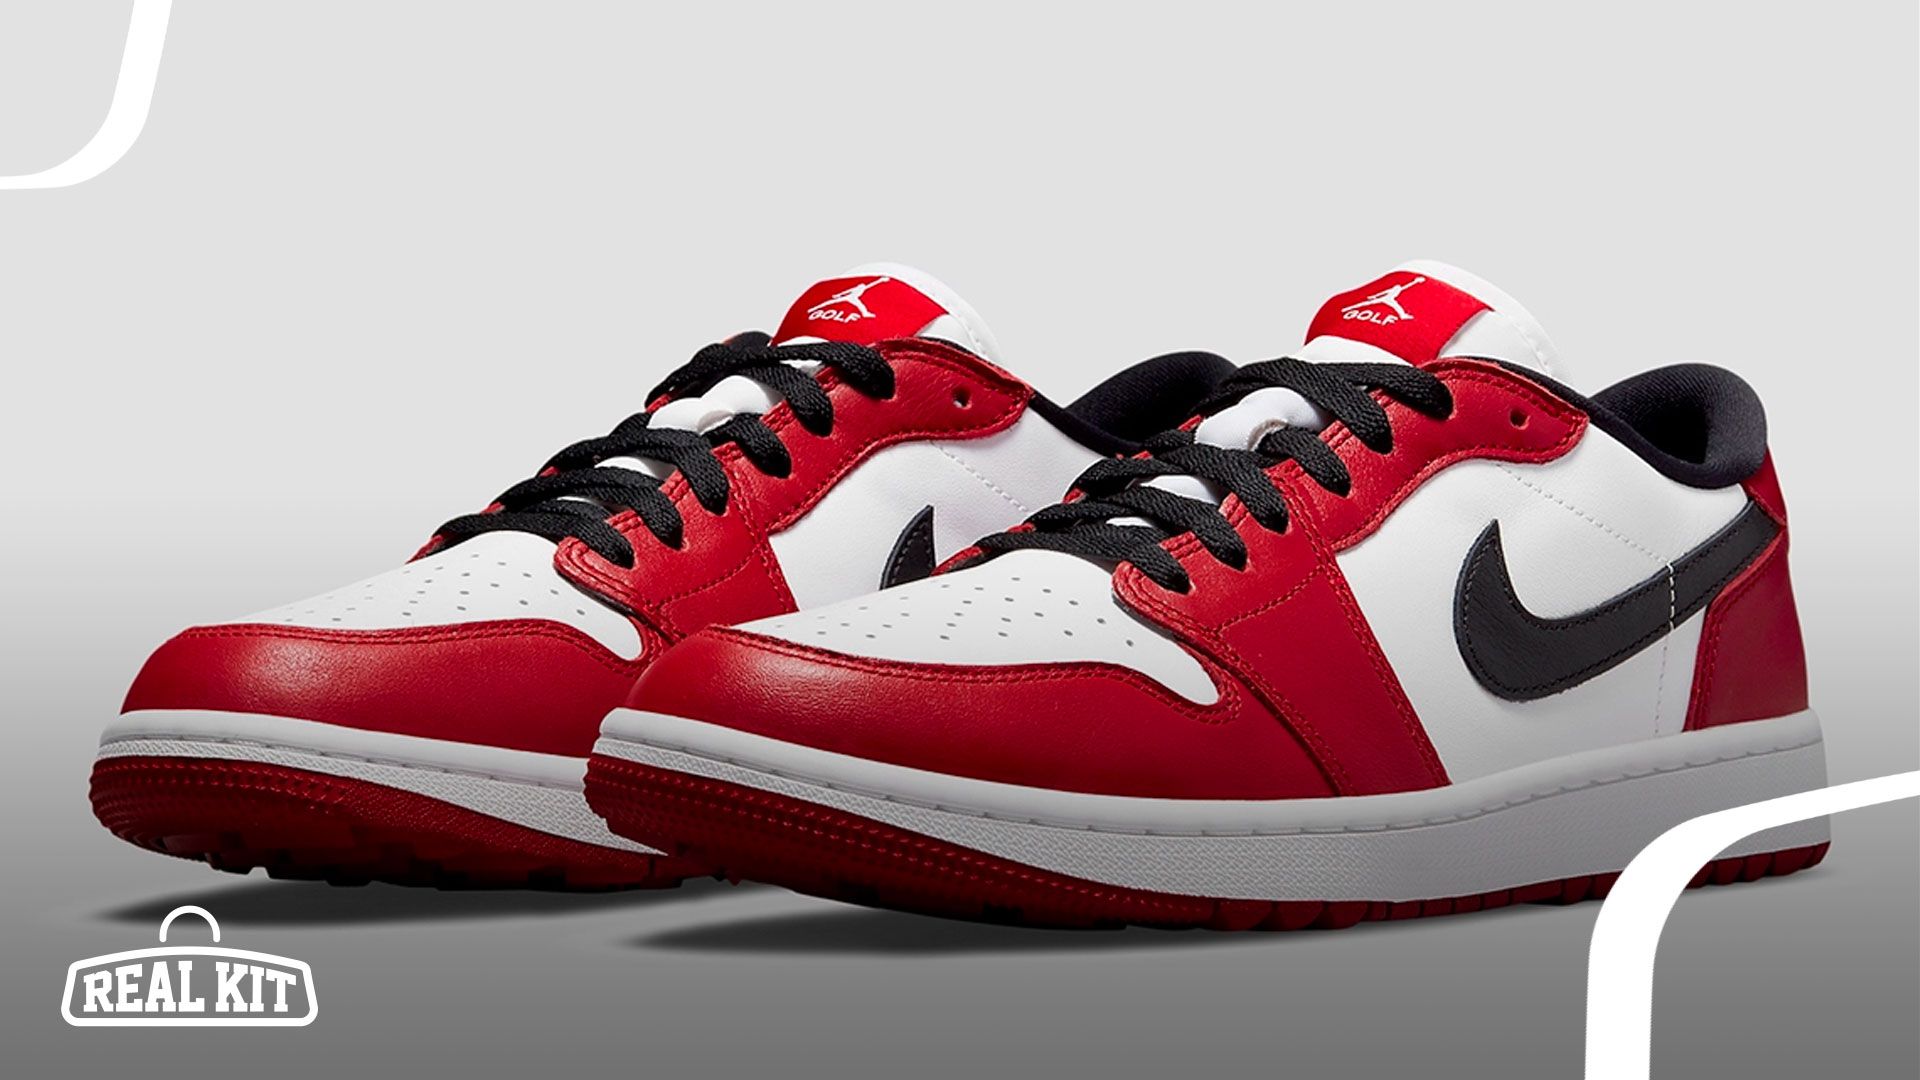 Air Jordan 1 Low Golf Chicago: Release Date, Price, And Where To Buy